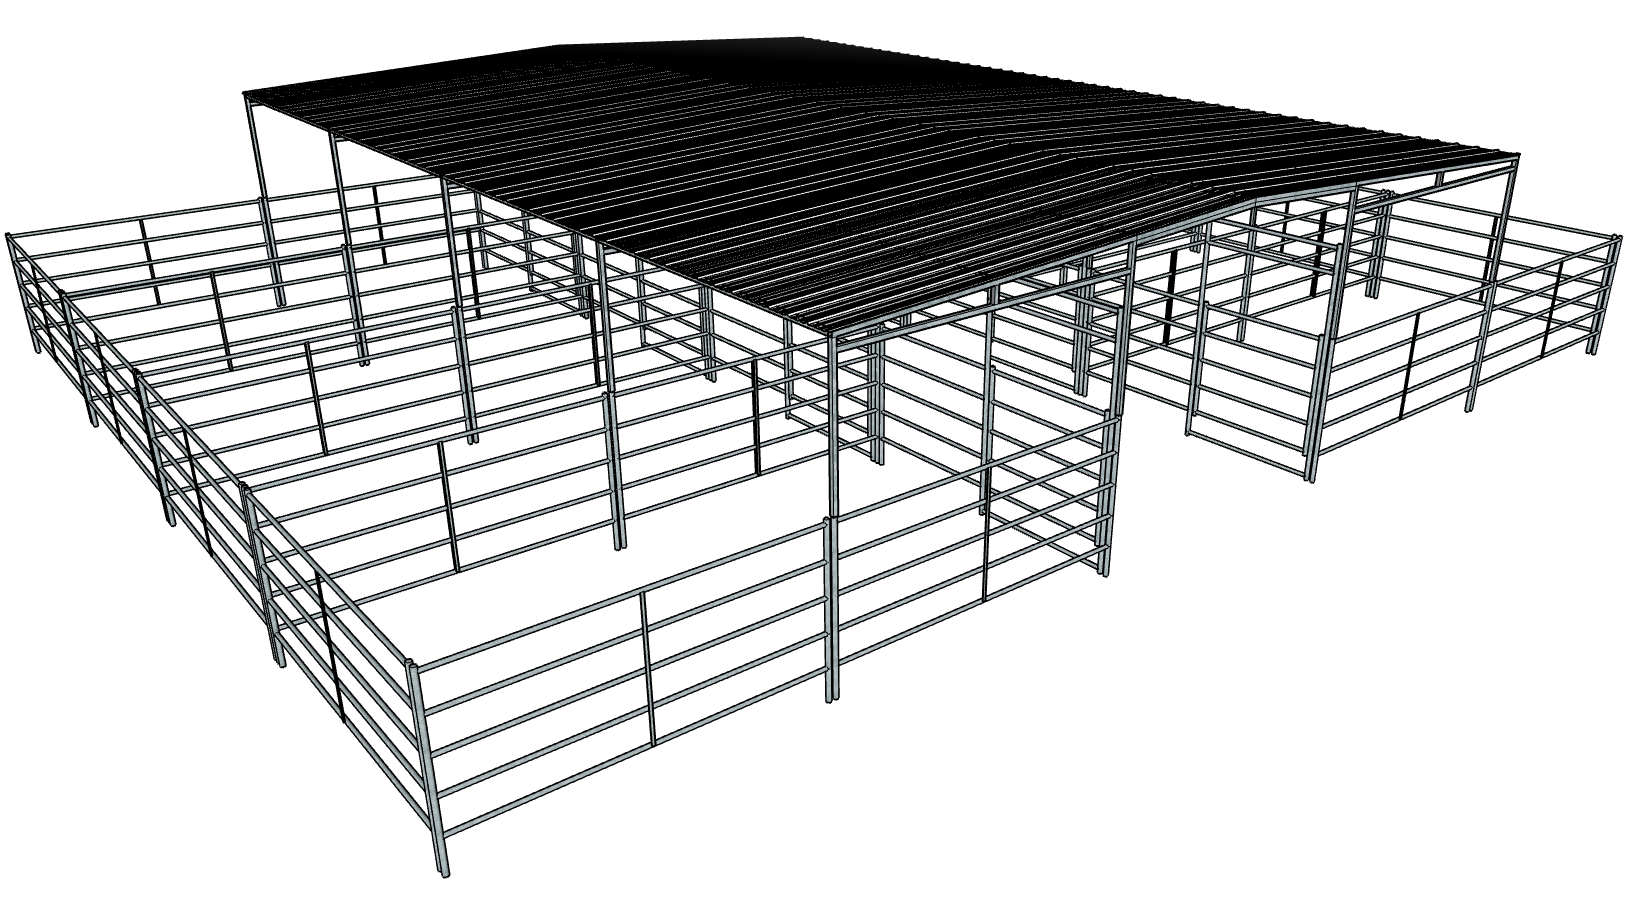 50 Ft X 40 Ft 5-Rail 8 Stall Barn Kit with 30 Ft by 40 Ft Gable Roof